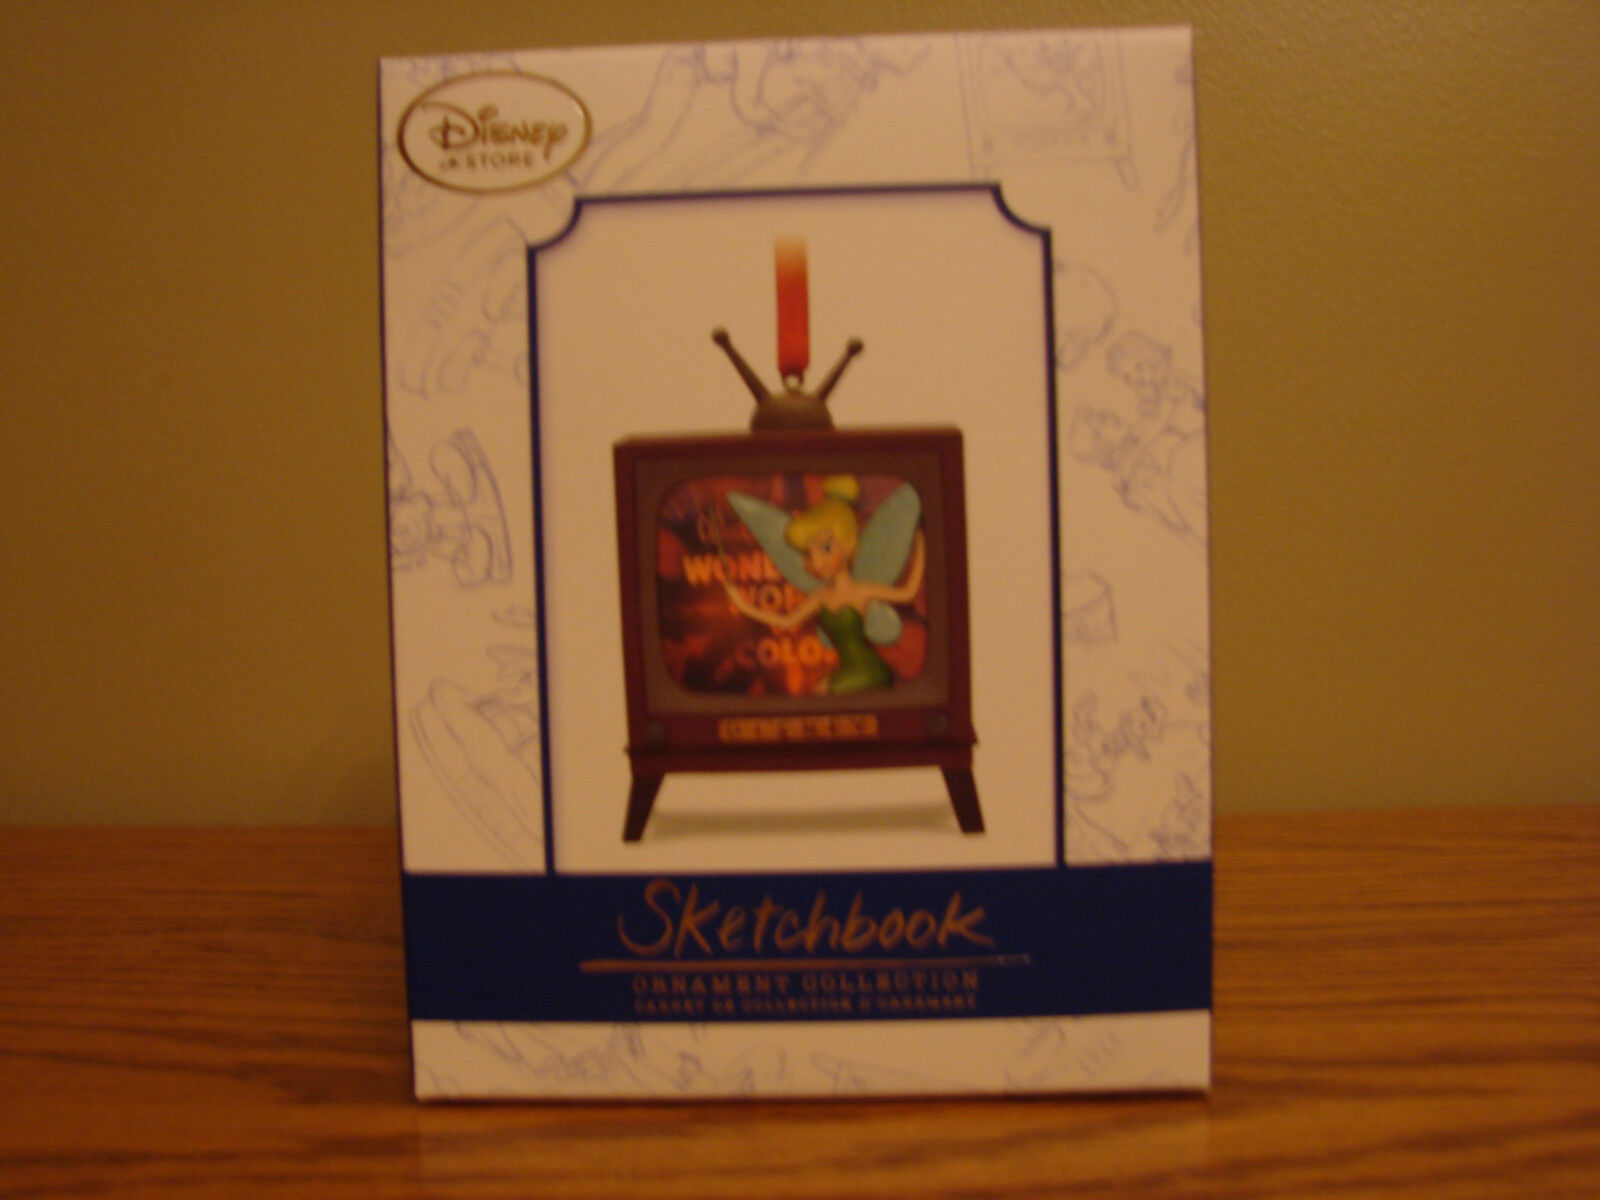 DISNEY Sketchbook TINKER BELL Light Up Christmas Holiday Ornament LE 1000 *NEW*